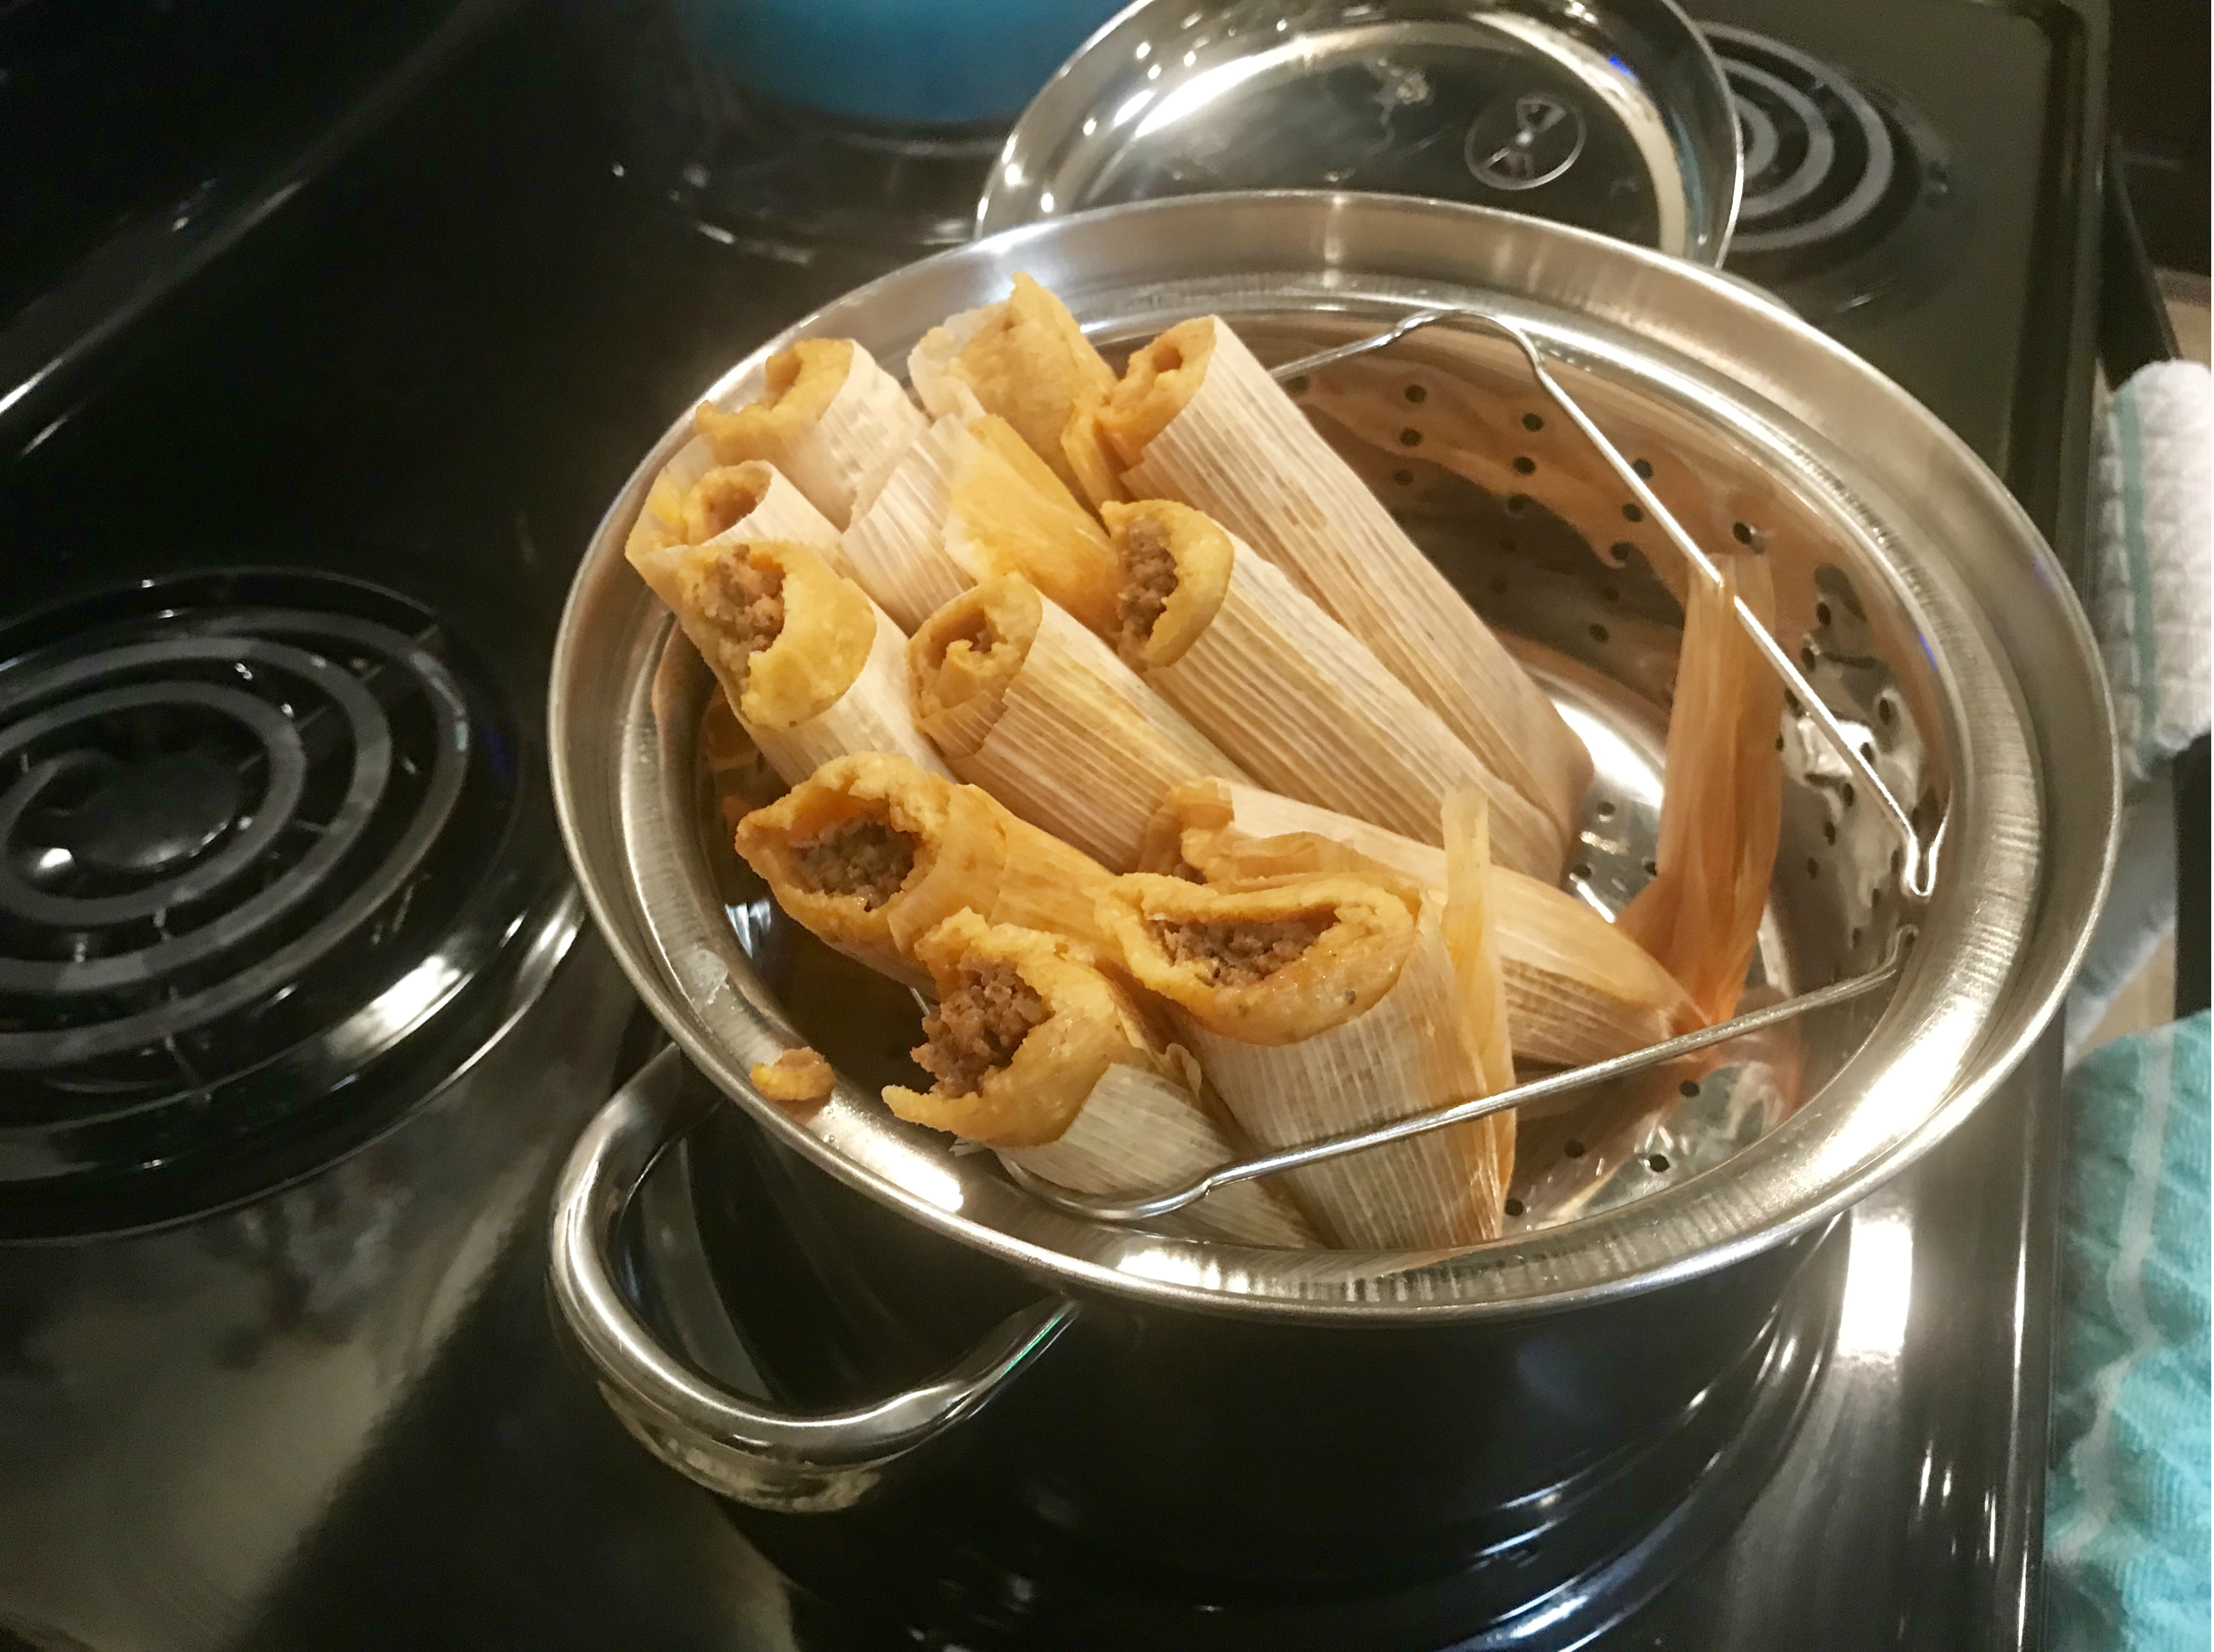 https://www.firstforwomen.com/wp-content/uploads/sites/2/2018/10/how-long-to-steam-tamales-stovetop.jpg